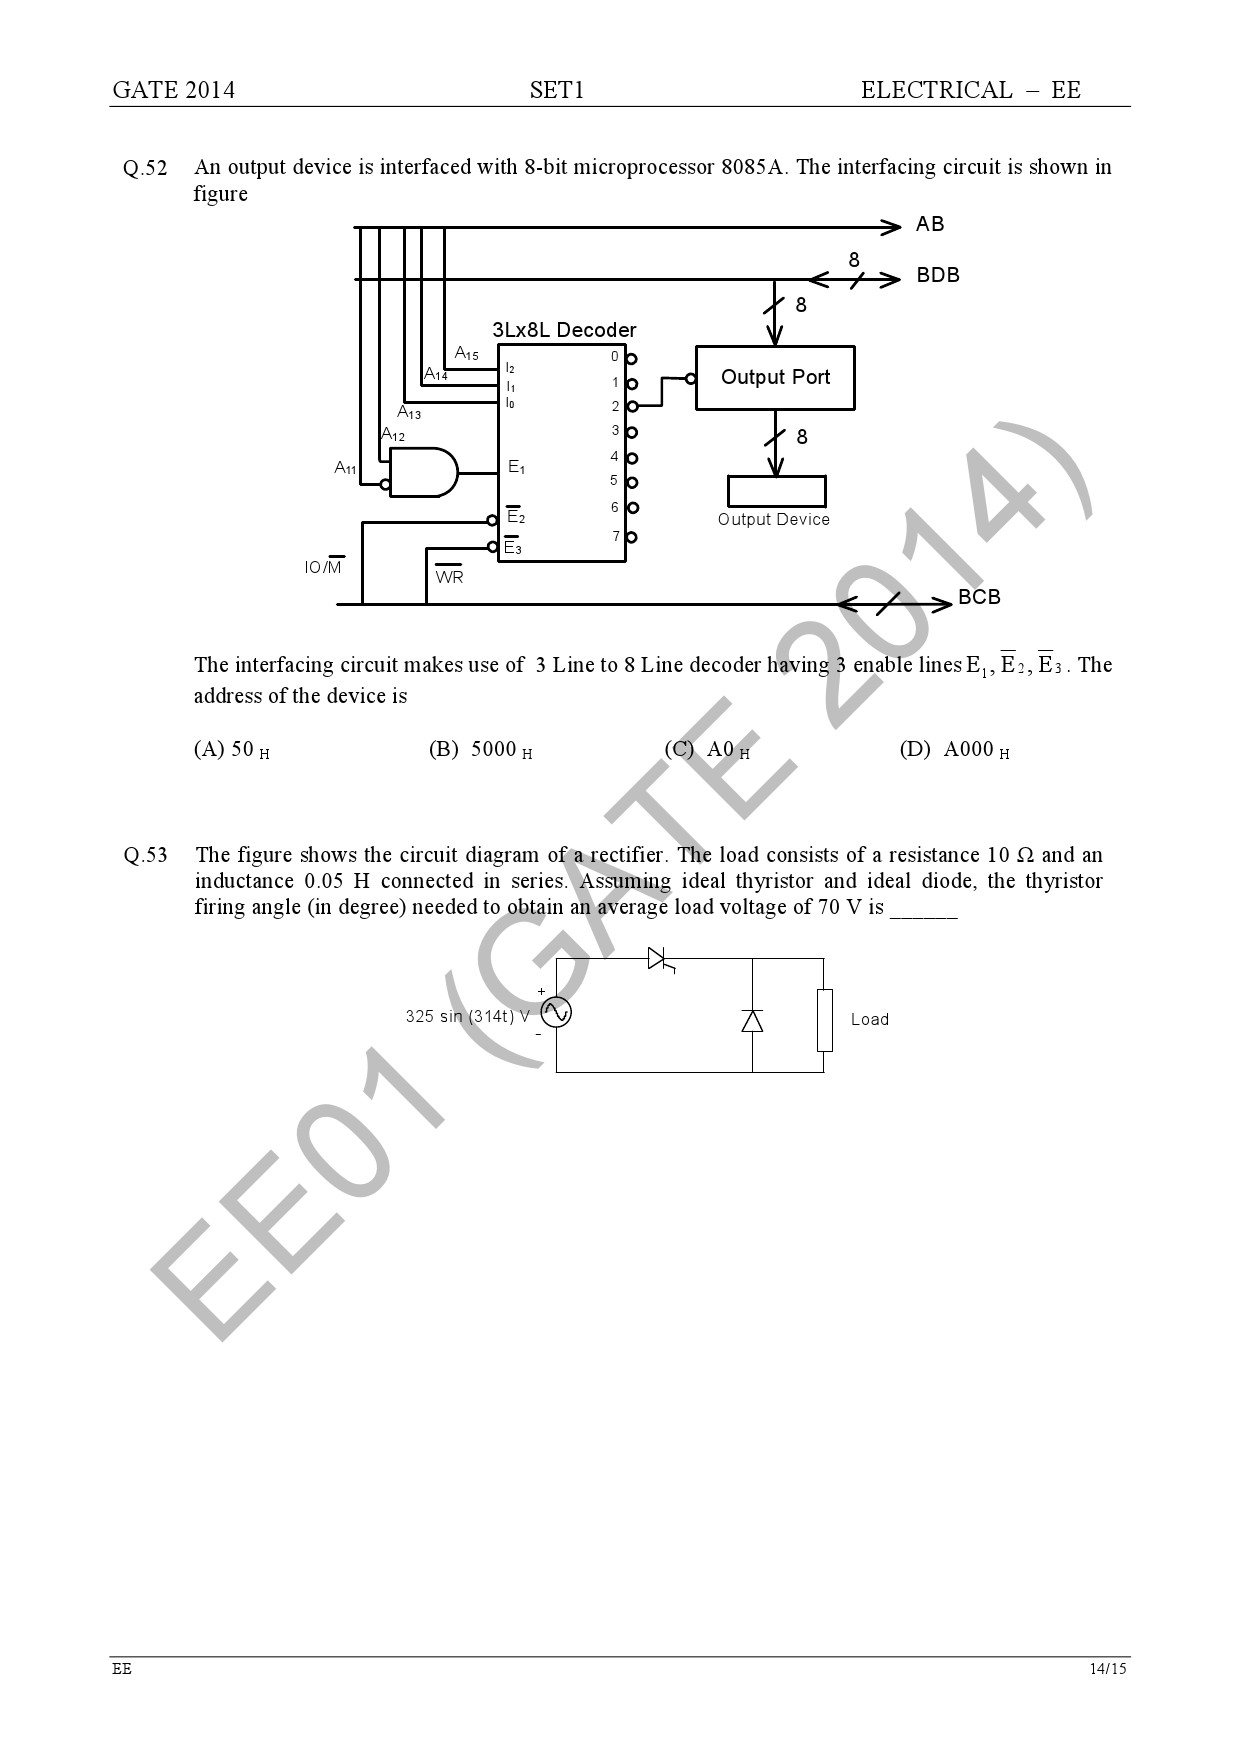 GATE Exam Question Paper 2014 Electrical Engineering Set 1 20